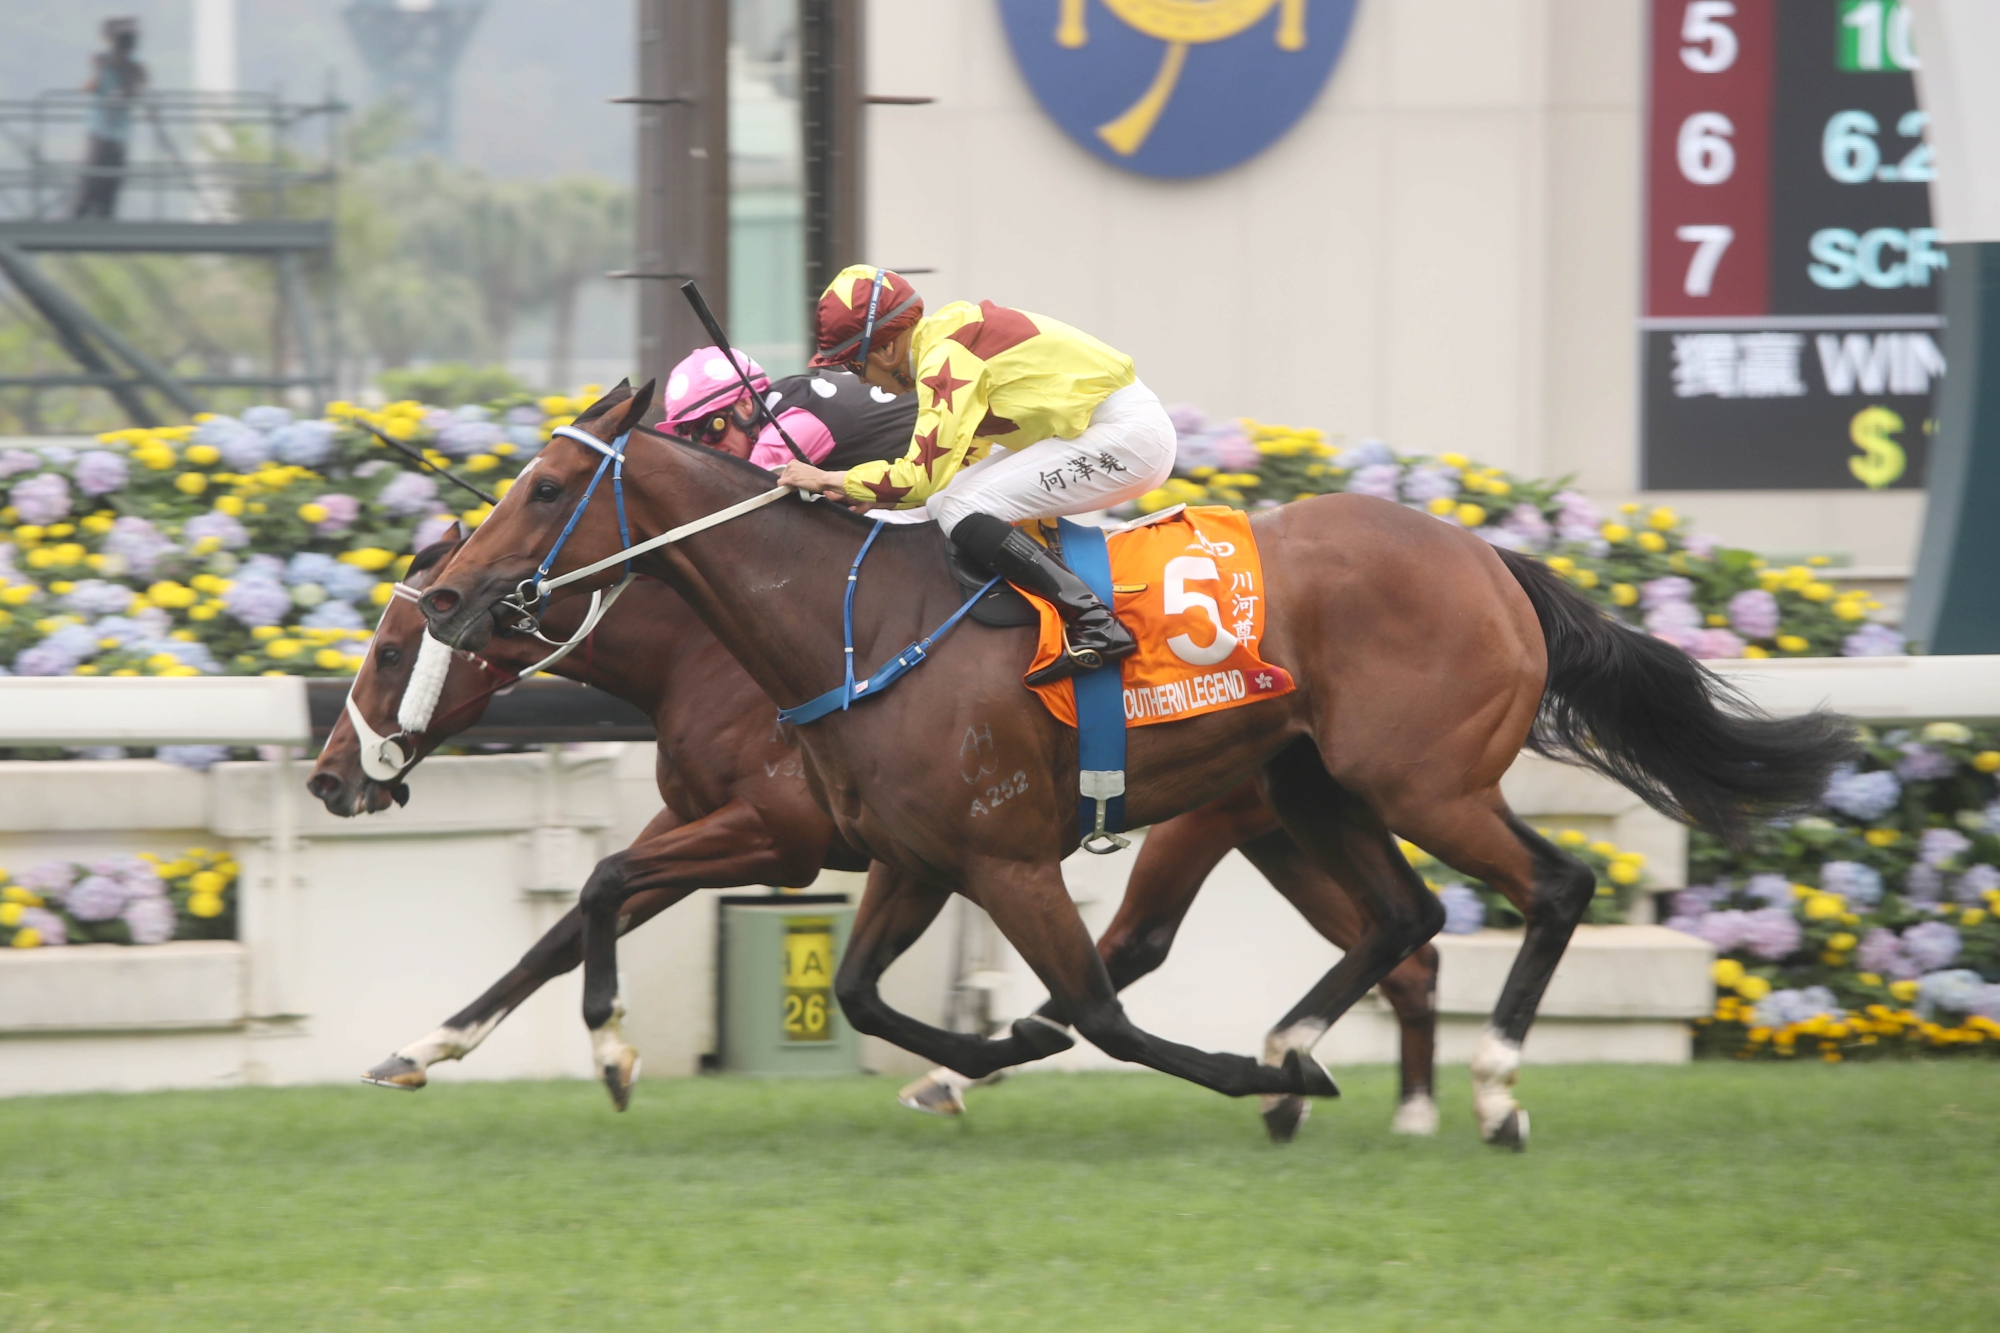 Southern Legend – HK : Dual SIN G1 Kranji Mile winner who edged Beauty Generation in a thrilling FWD Champions Mile victory last season.